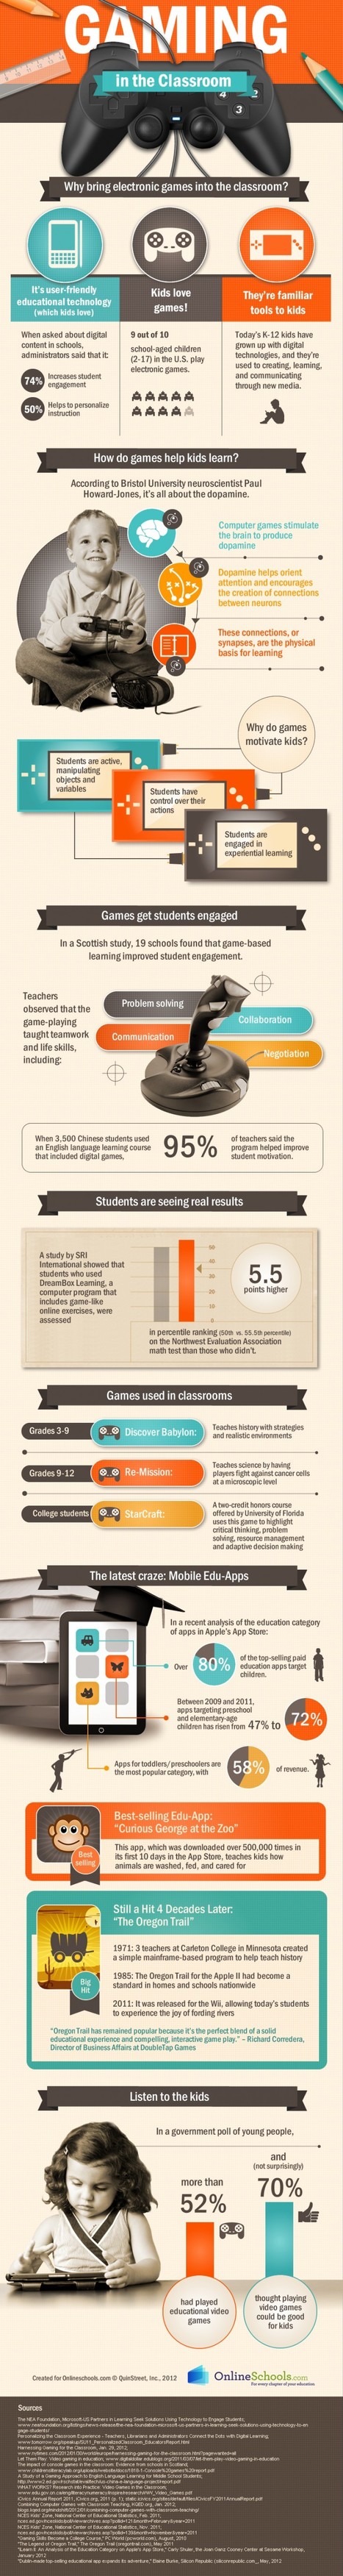 A Must-Have Guide To Gaming In The Classroom - with an interesting Infographic | 21st Century Learning and Teaching | Scoop.it